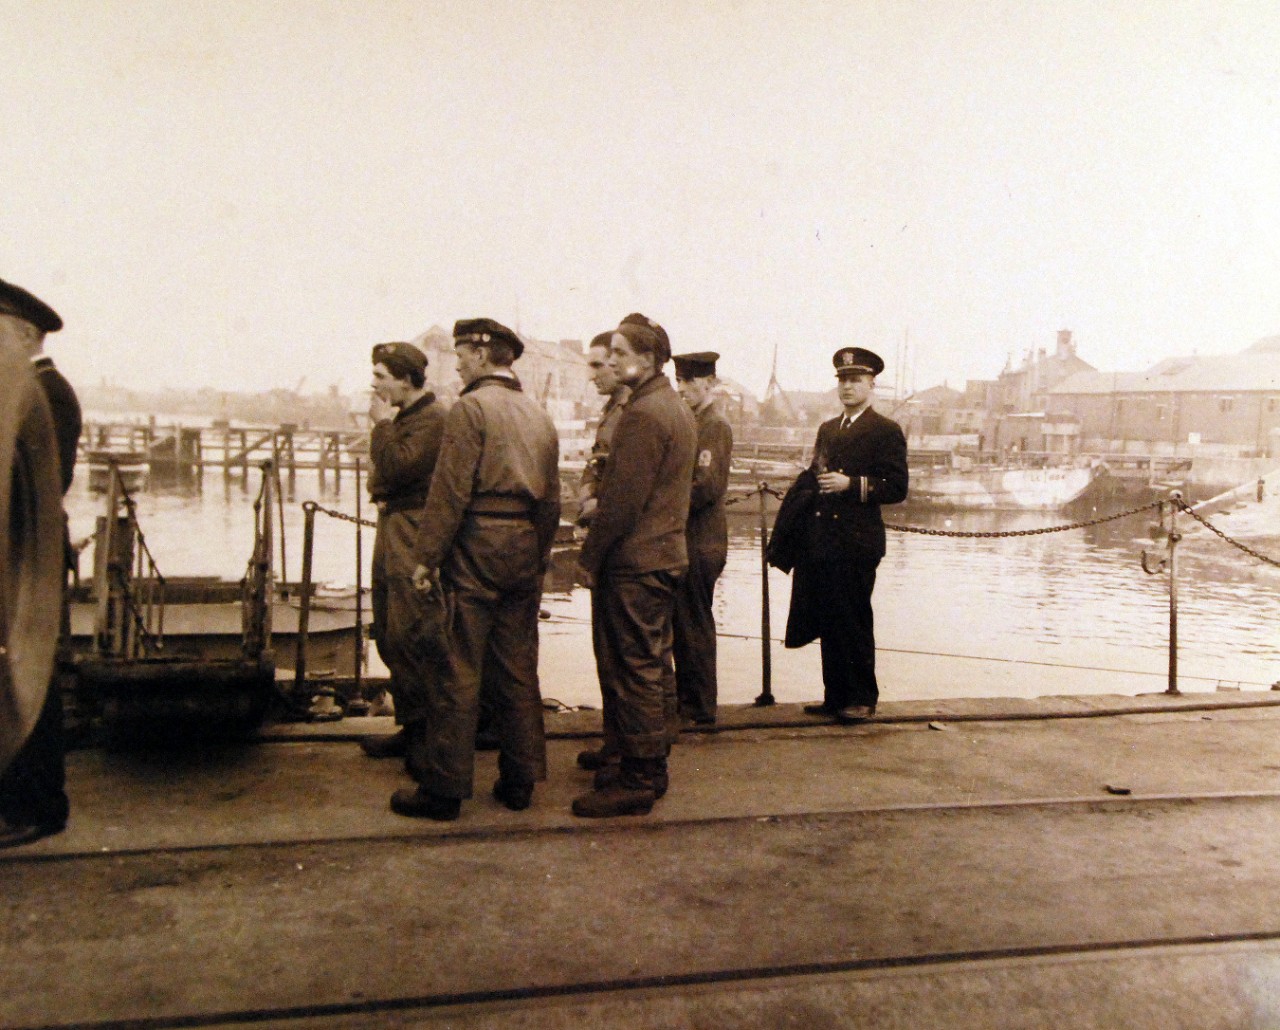 <p>80-G-322625: Surrender of German U-boats, 1945. German submarine, U-249, surrender at Portland, UK, May 10, 1945. Shown: crew of UB prepares to leave their submarine for POW Camp. Commander, Naval Forces, Europe Photograph received May 26, 1945.&nbsp;</p>
